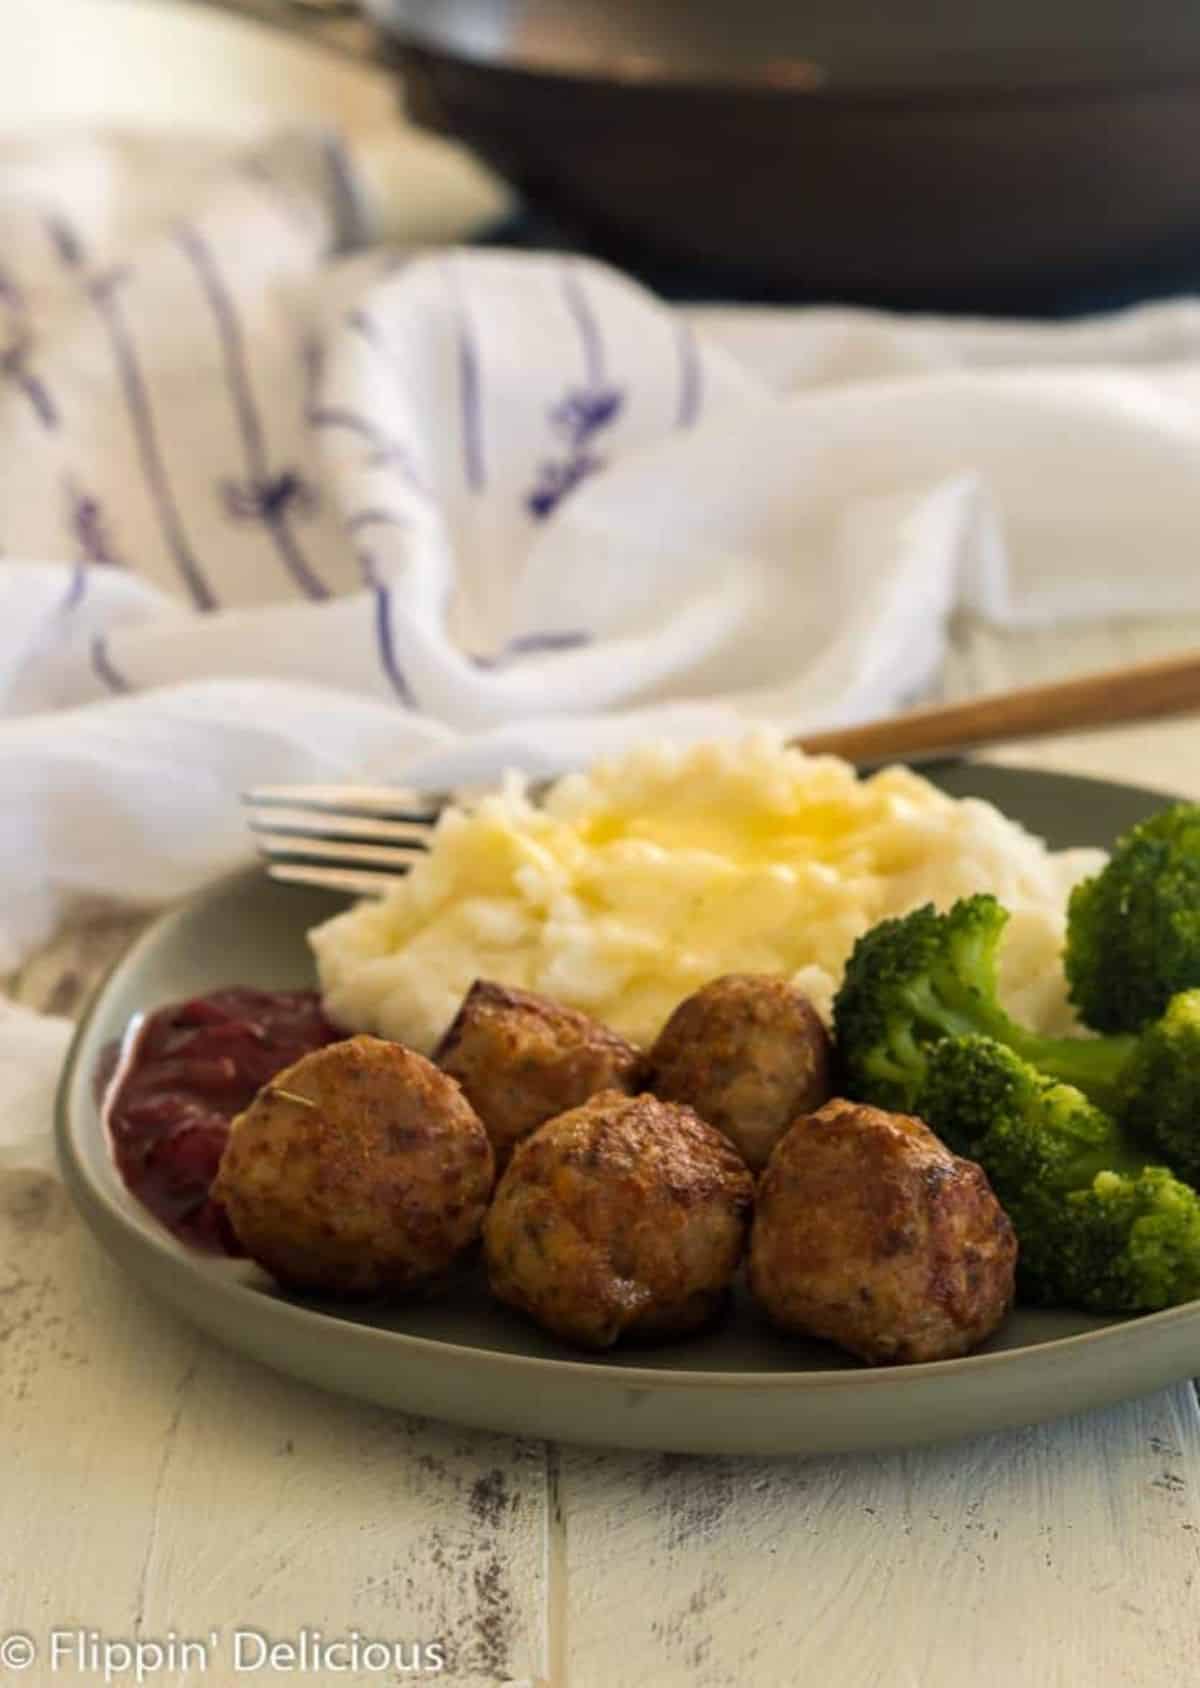 Gluten-Free Meatballs with mashed potatoes and broccoli on a gray plate.